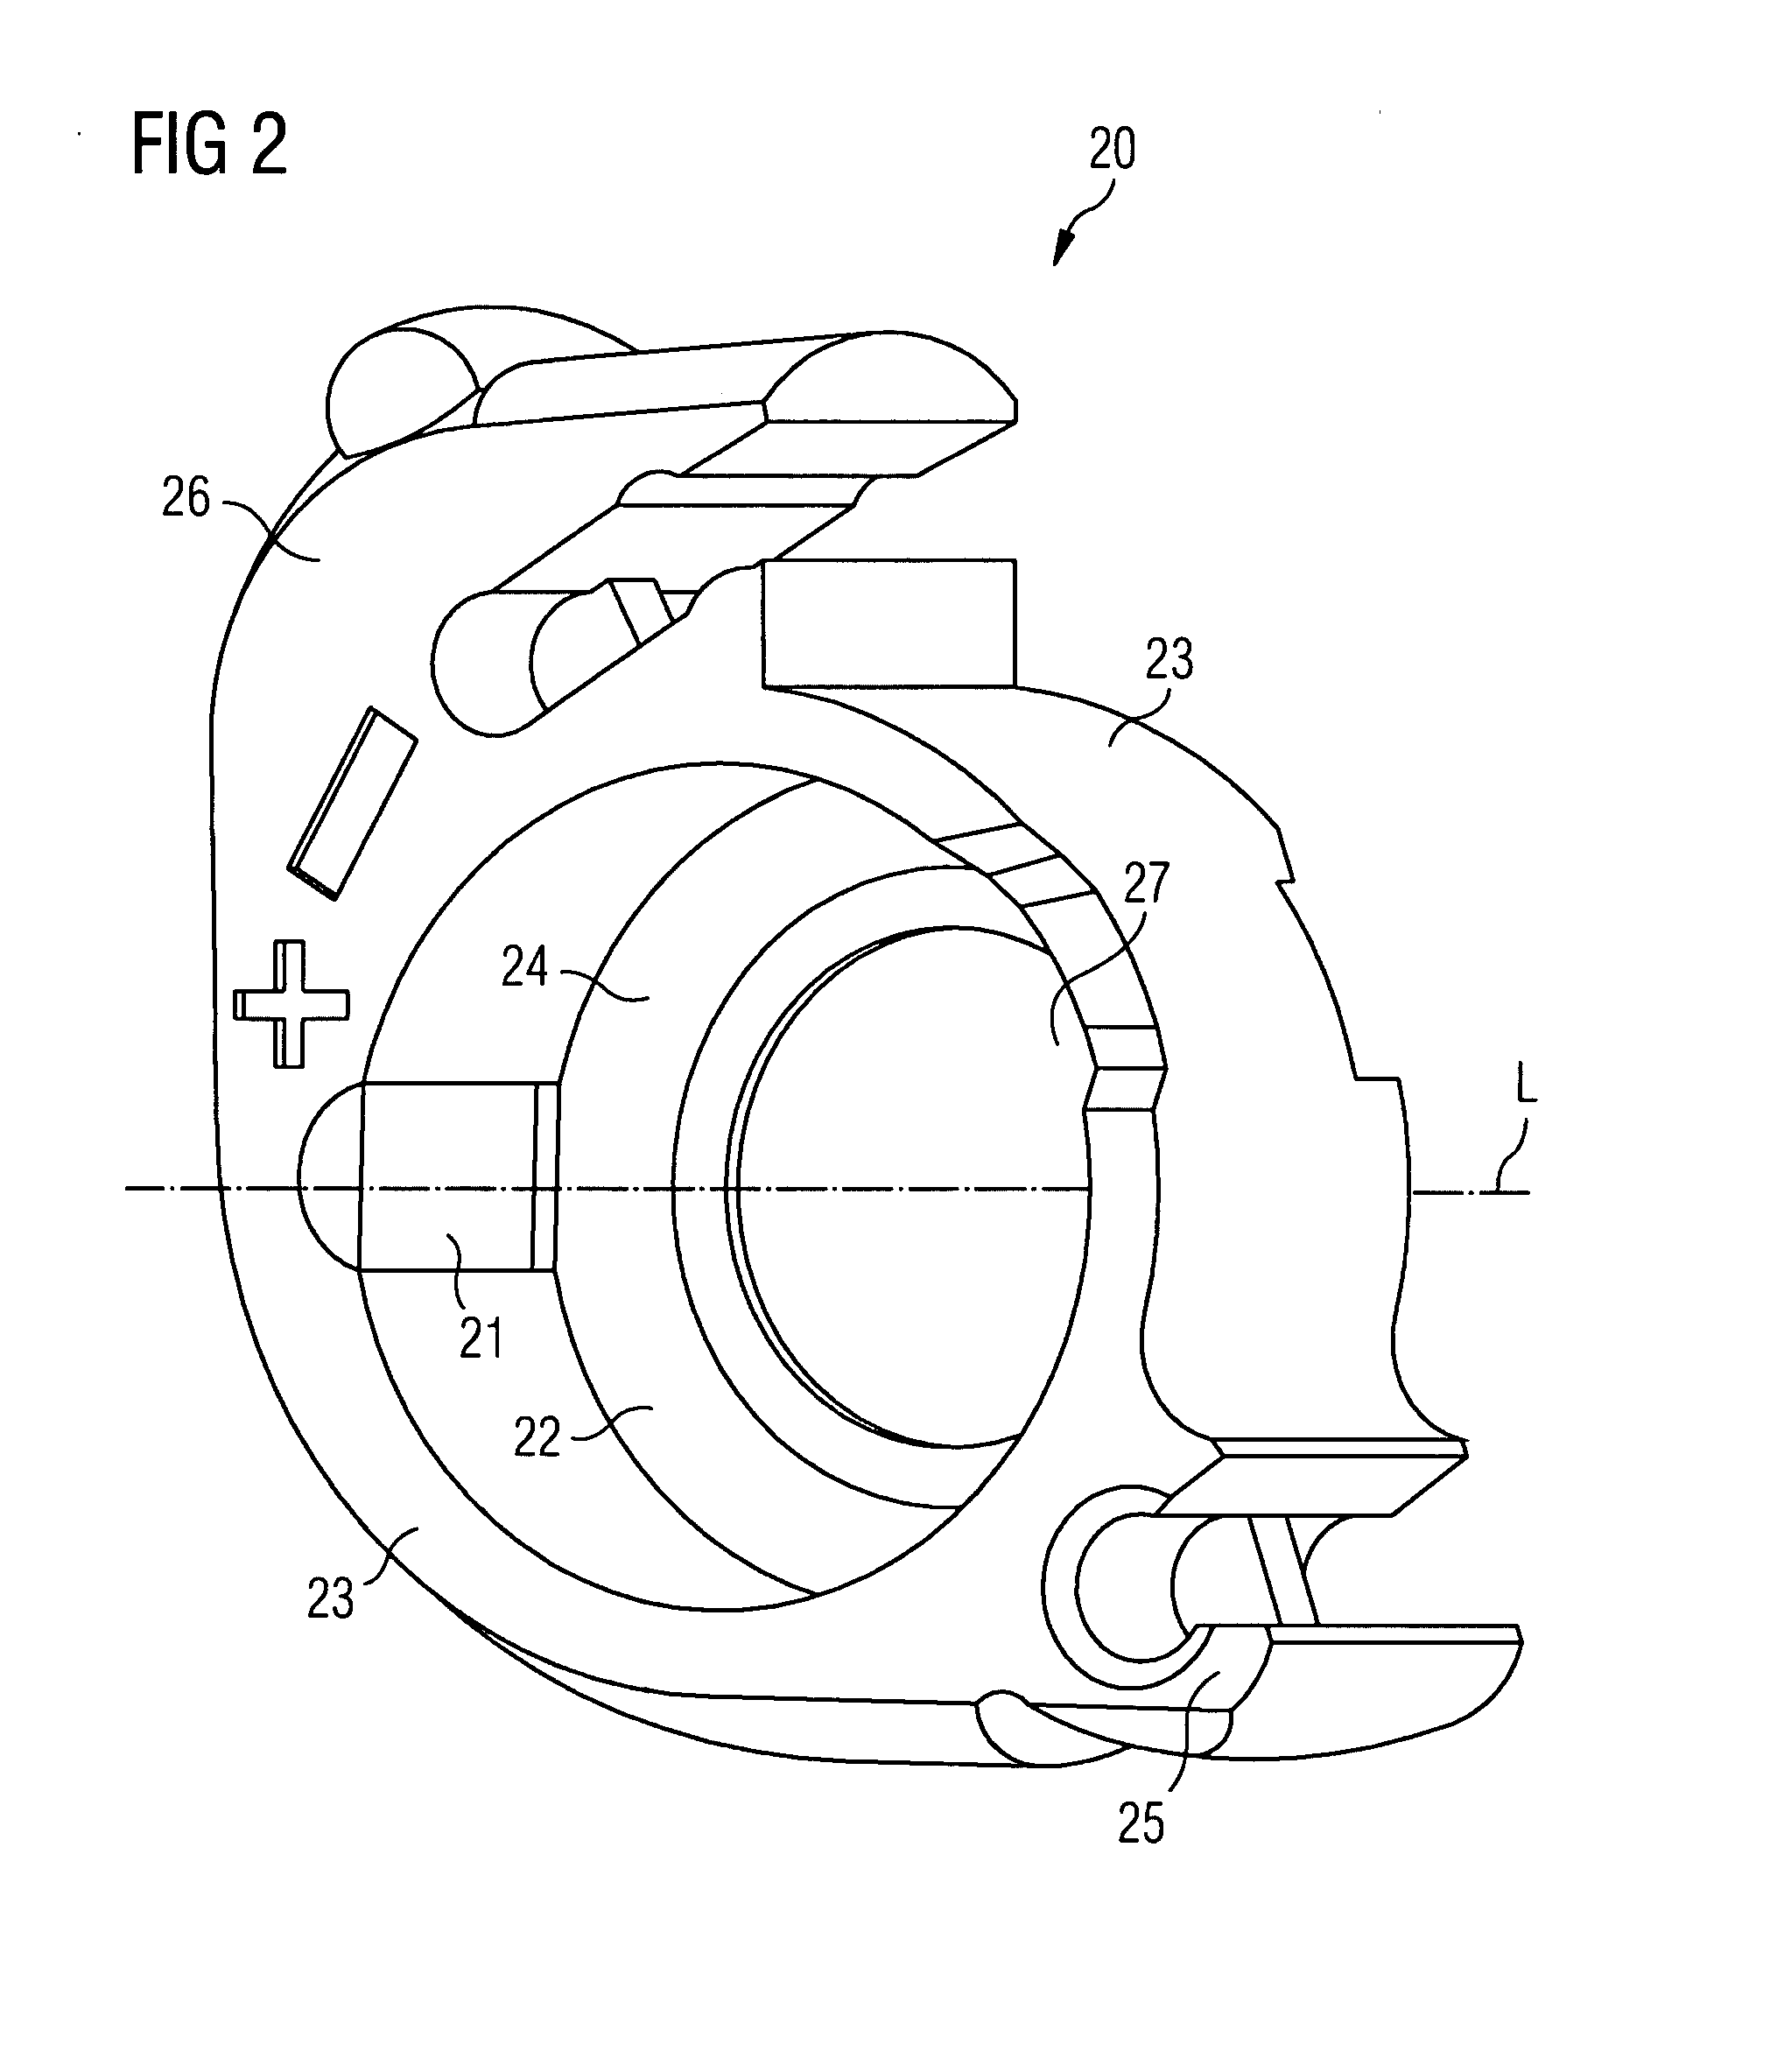 Hearing aid with a battery compartment